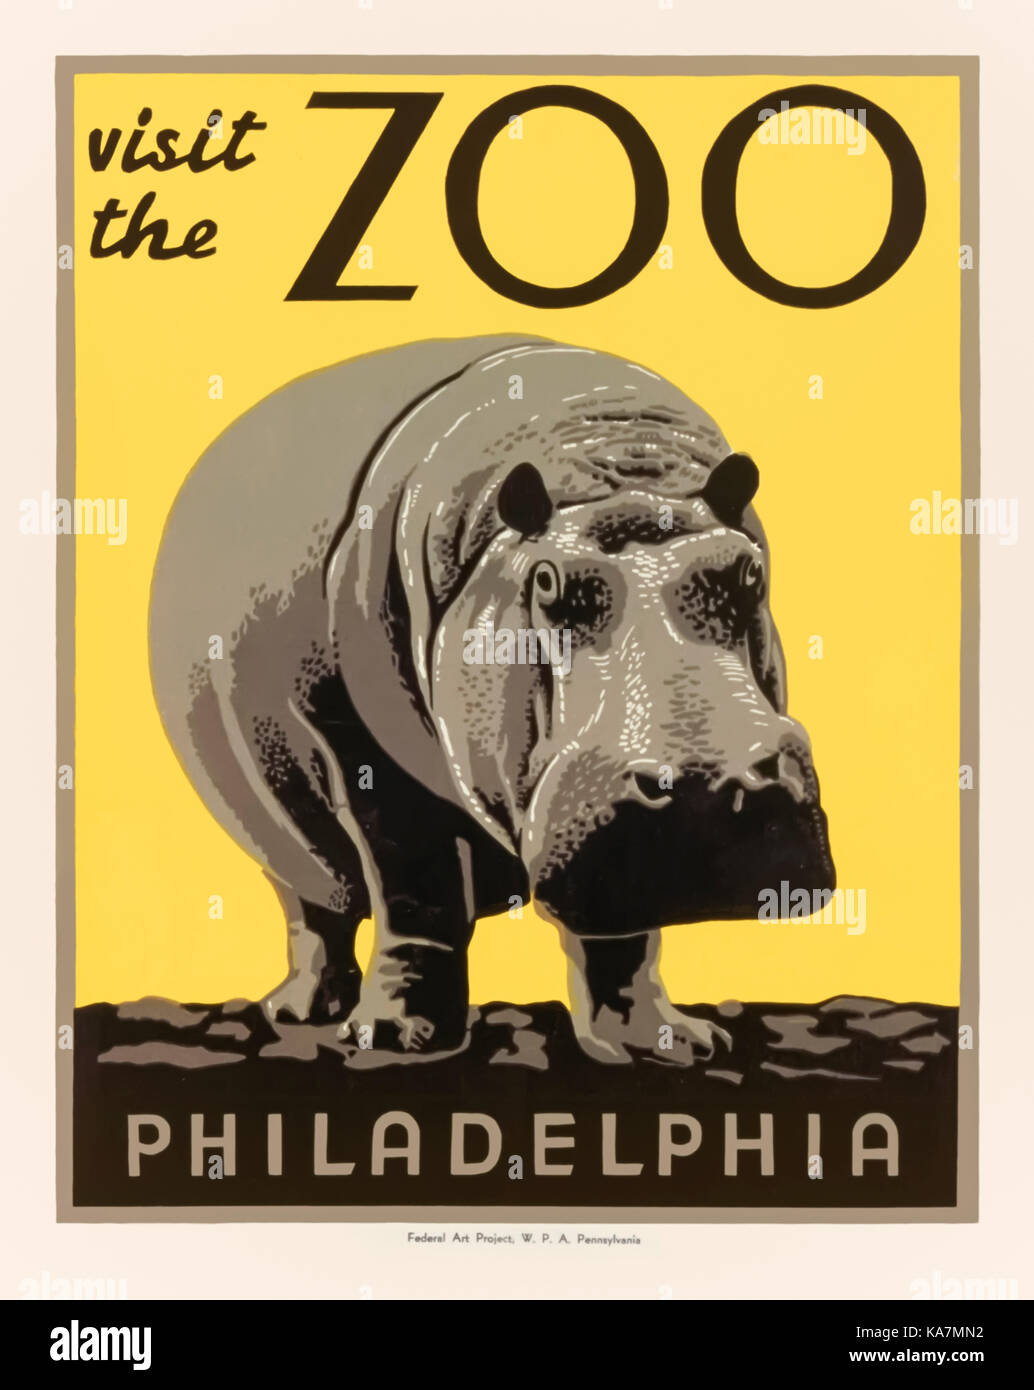 “Visit the Zoo – Philadelphia” 1936 poster featuring a woodblock print of a hippopotamus produced under the Federal Project Number One sponsored by the Works Progress Administration (WPA) created in 1935 as part of the New Deal of President Franklin D. Roosevelt to tackle the Great Depression. Stock Photo